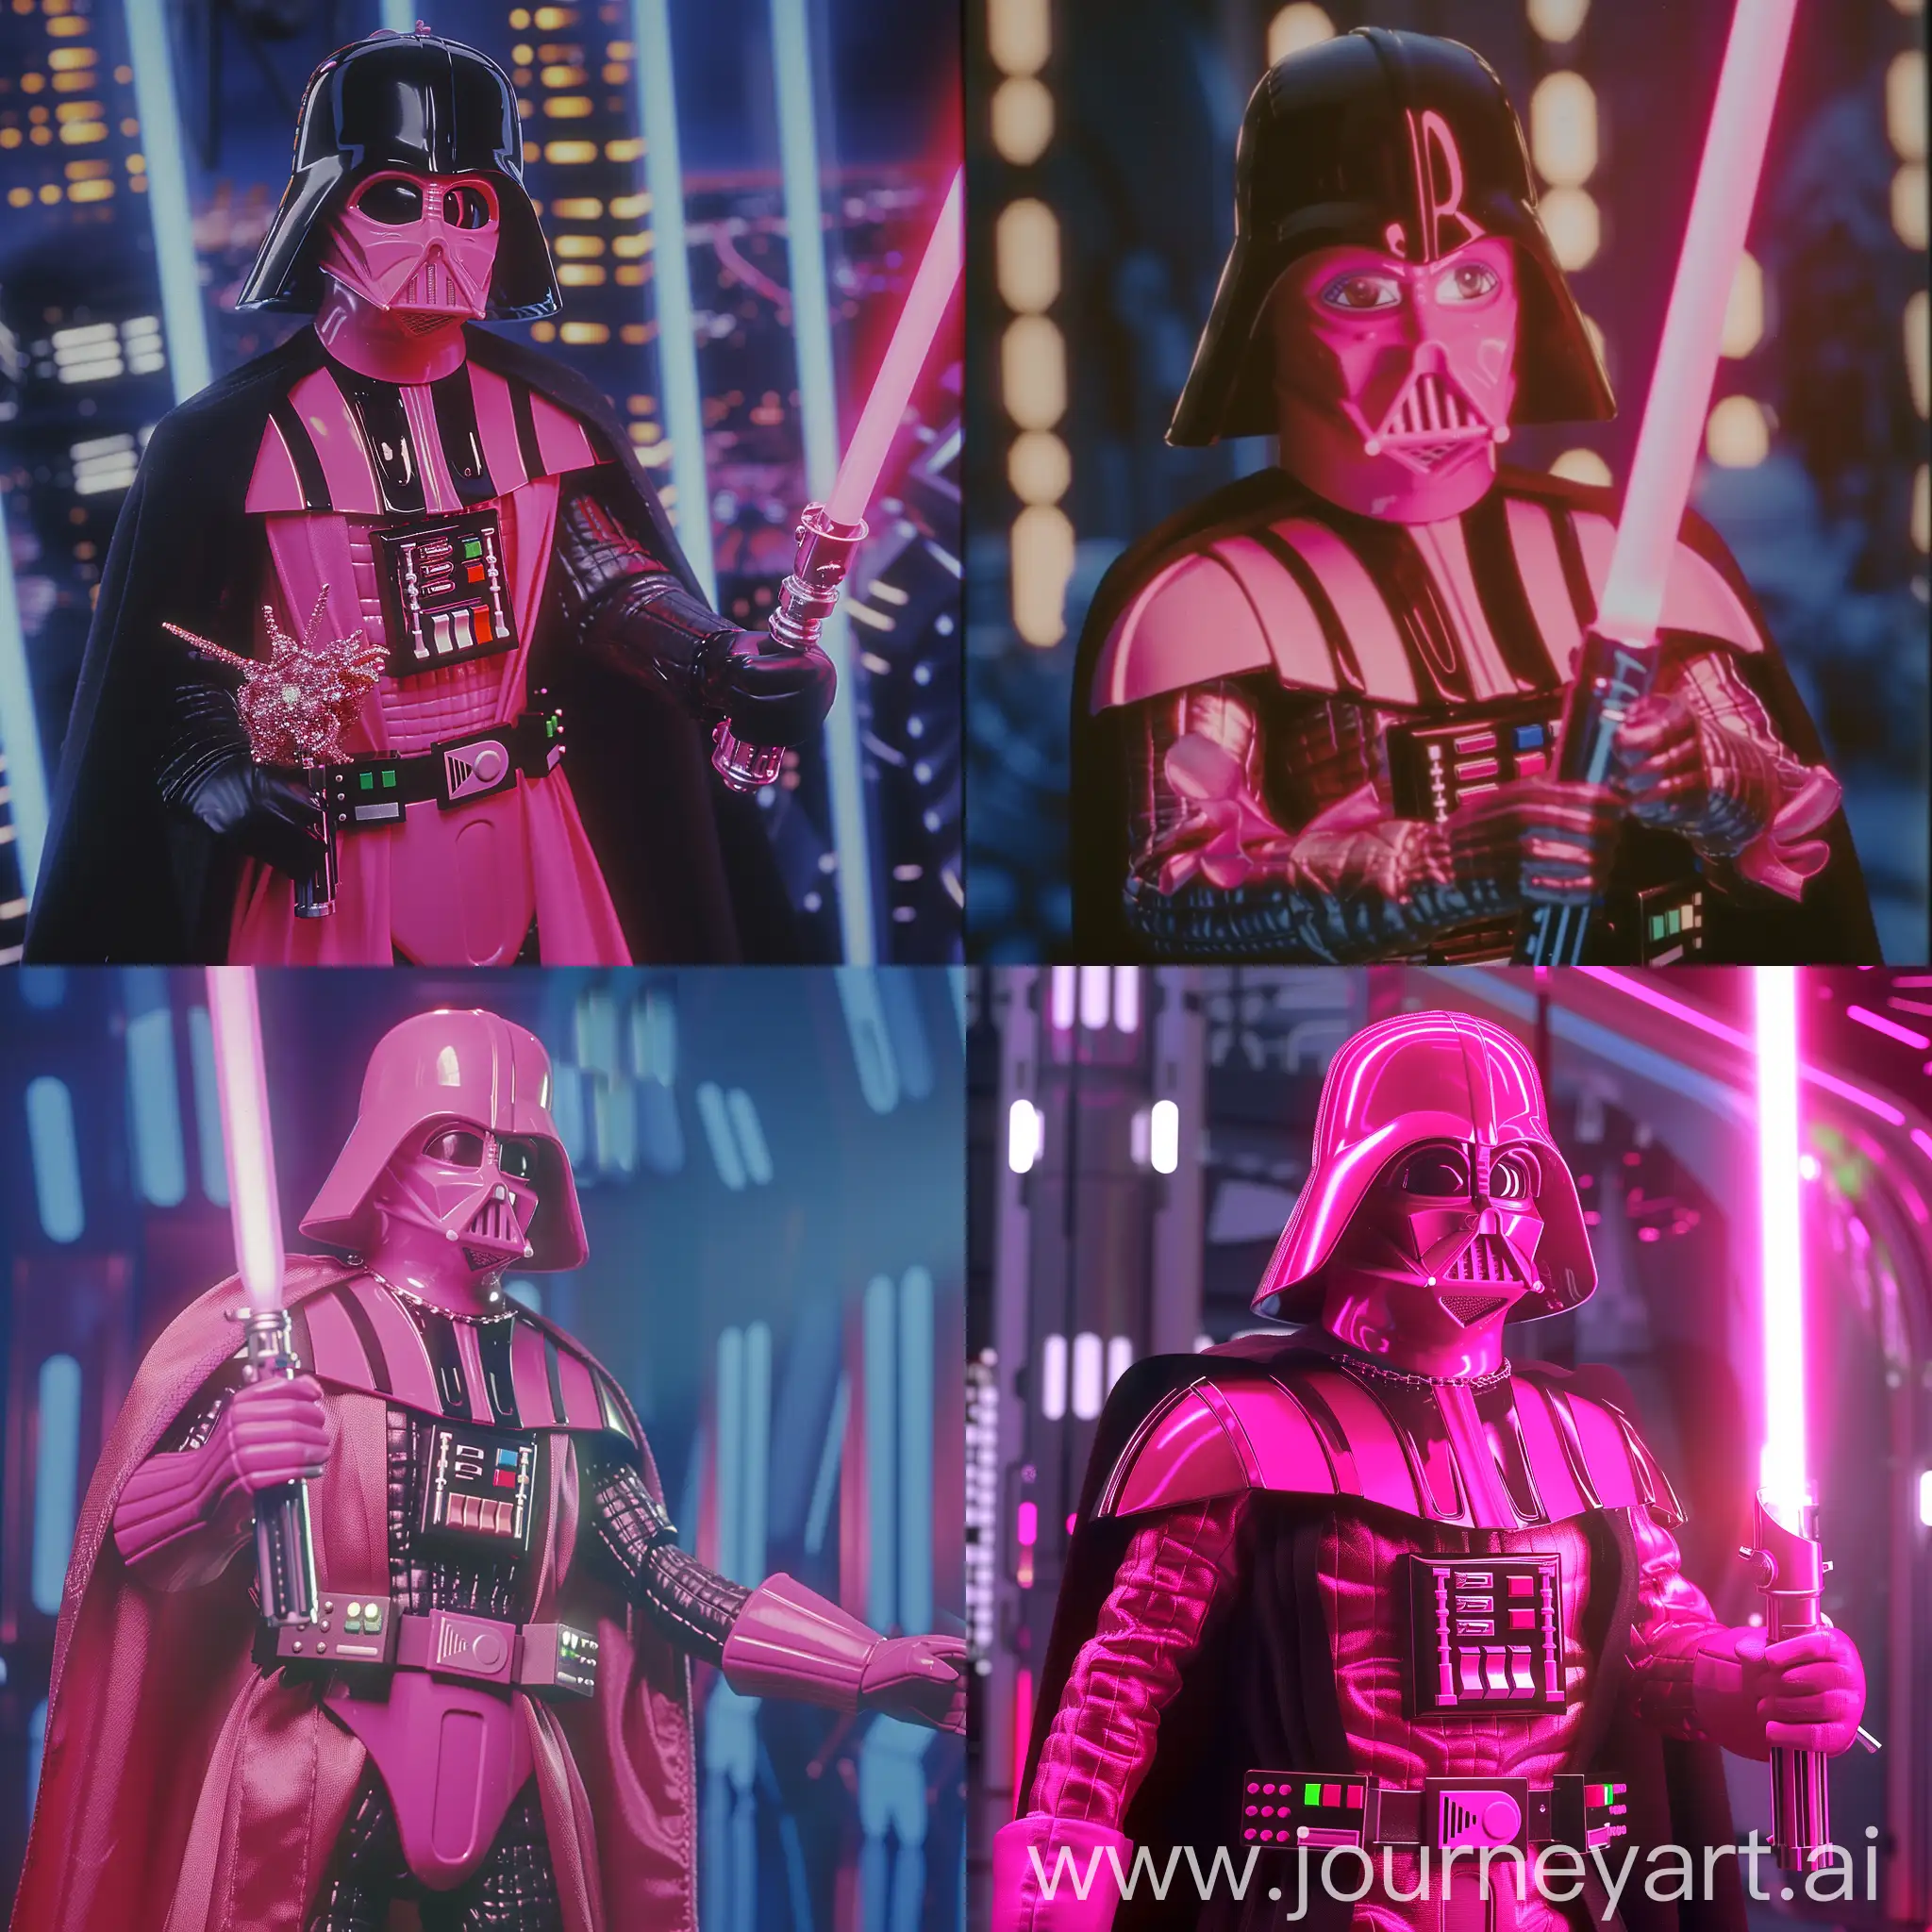 Barbie-Vader-in-Romantic-Pink-Costume-with-Lightsaber-80s-Anime-Film-Aesthetic